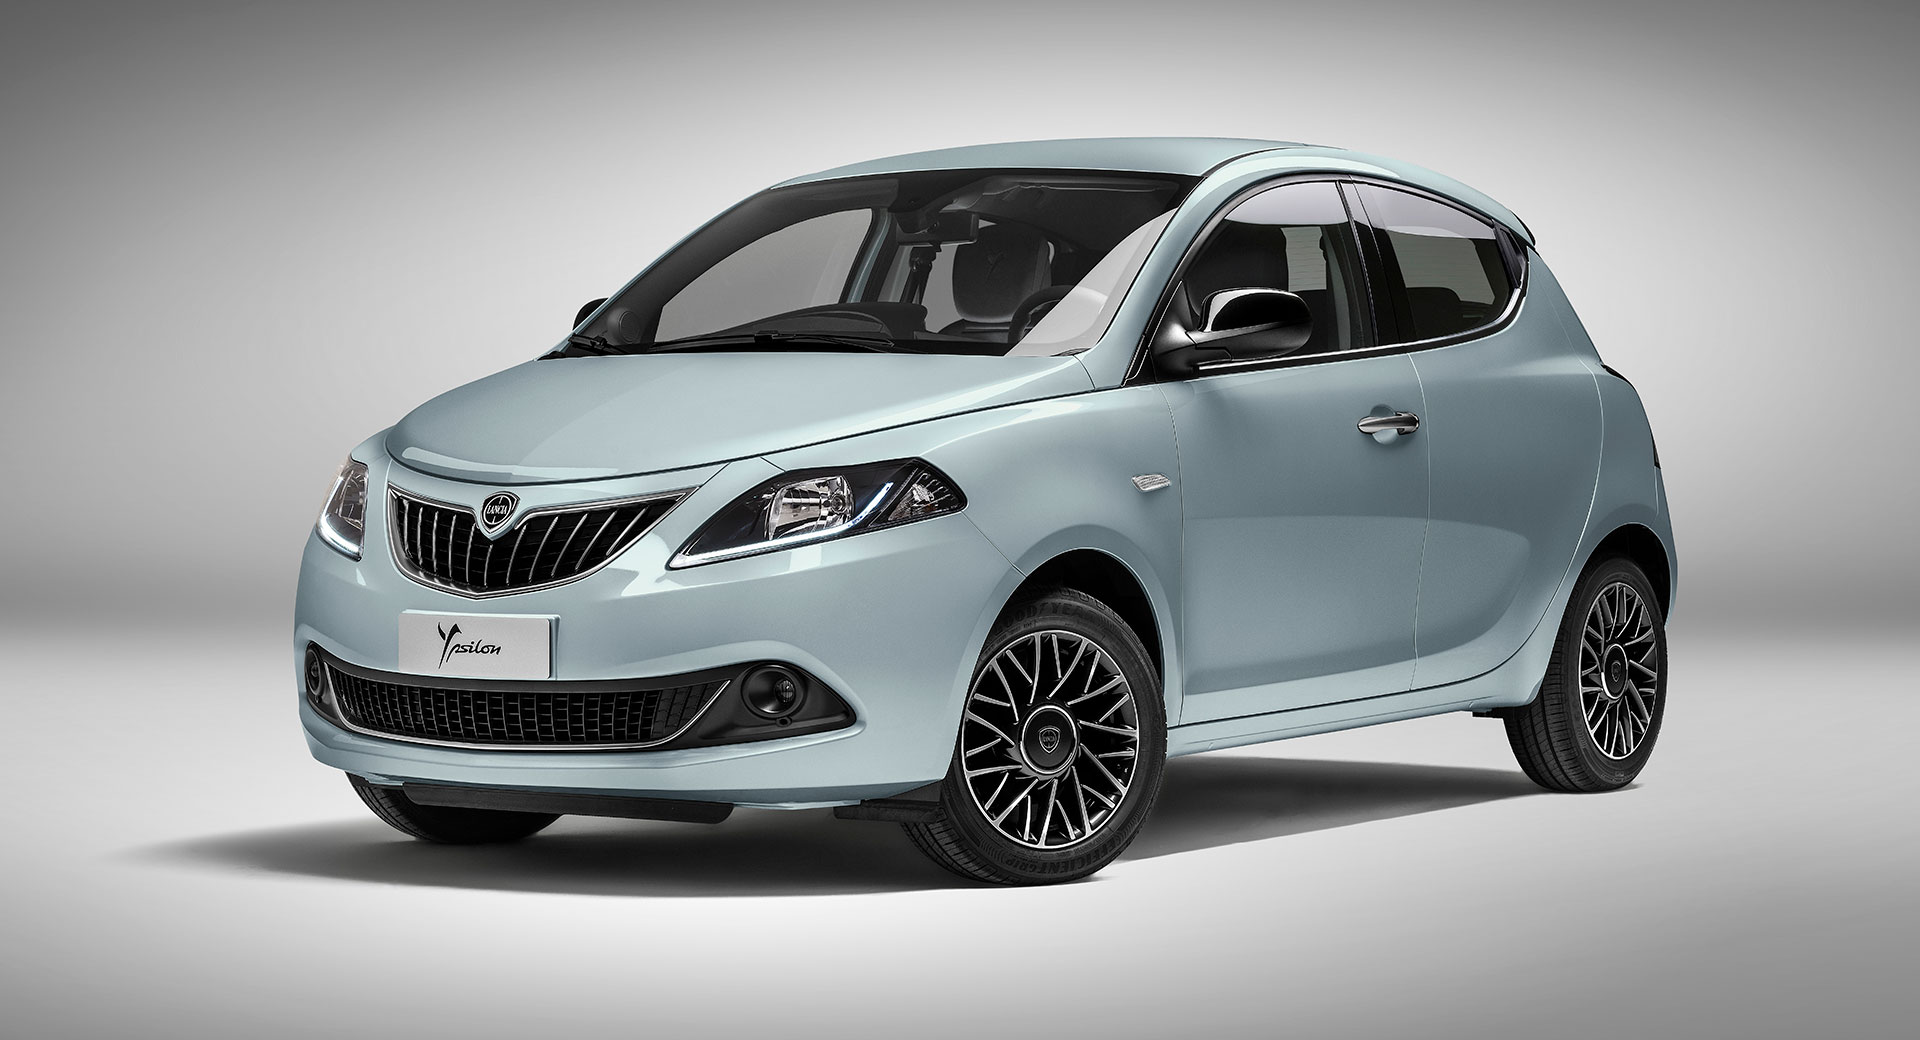 11 Years Later, Lancia Is Still Updating The Ypsilon For Its